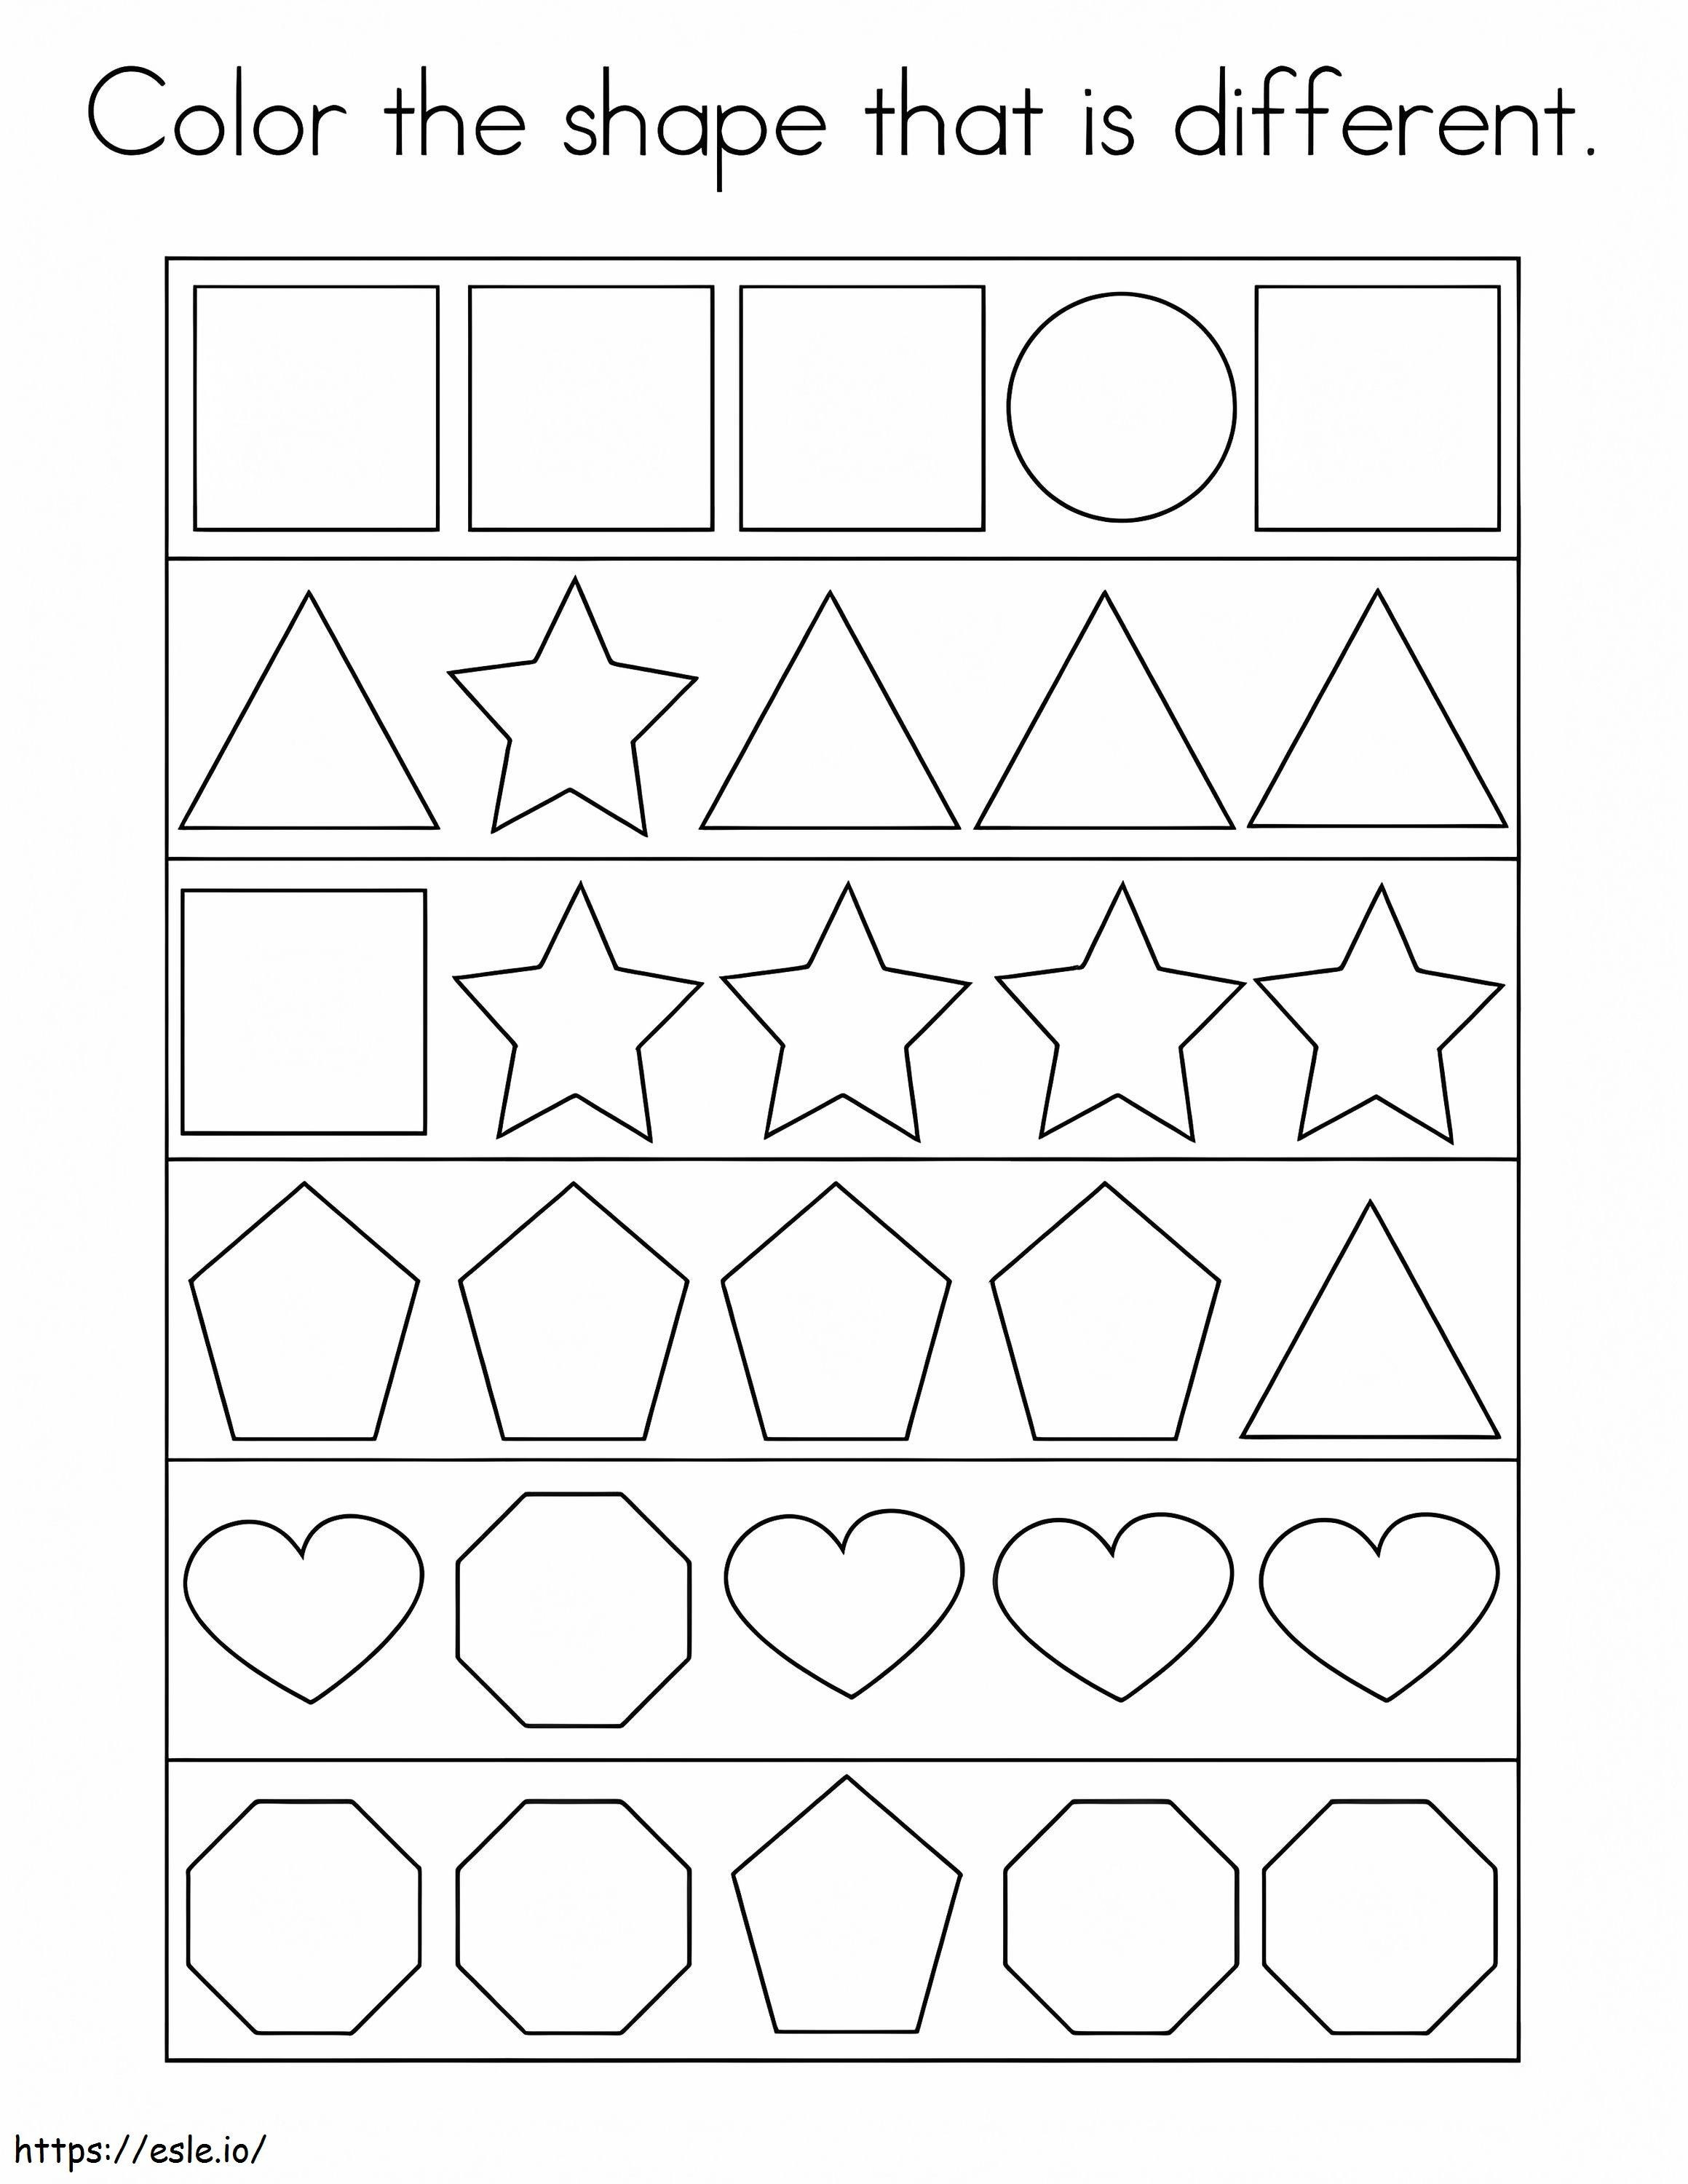 Popular Shapes coloring page